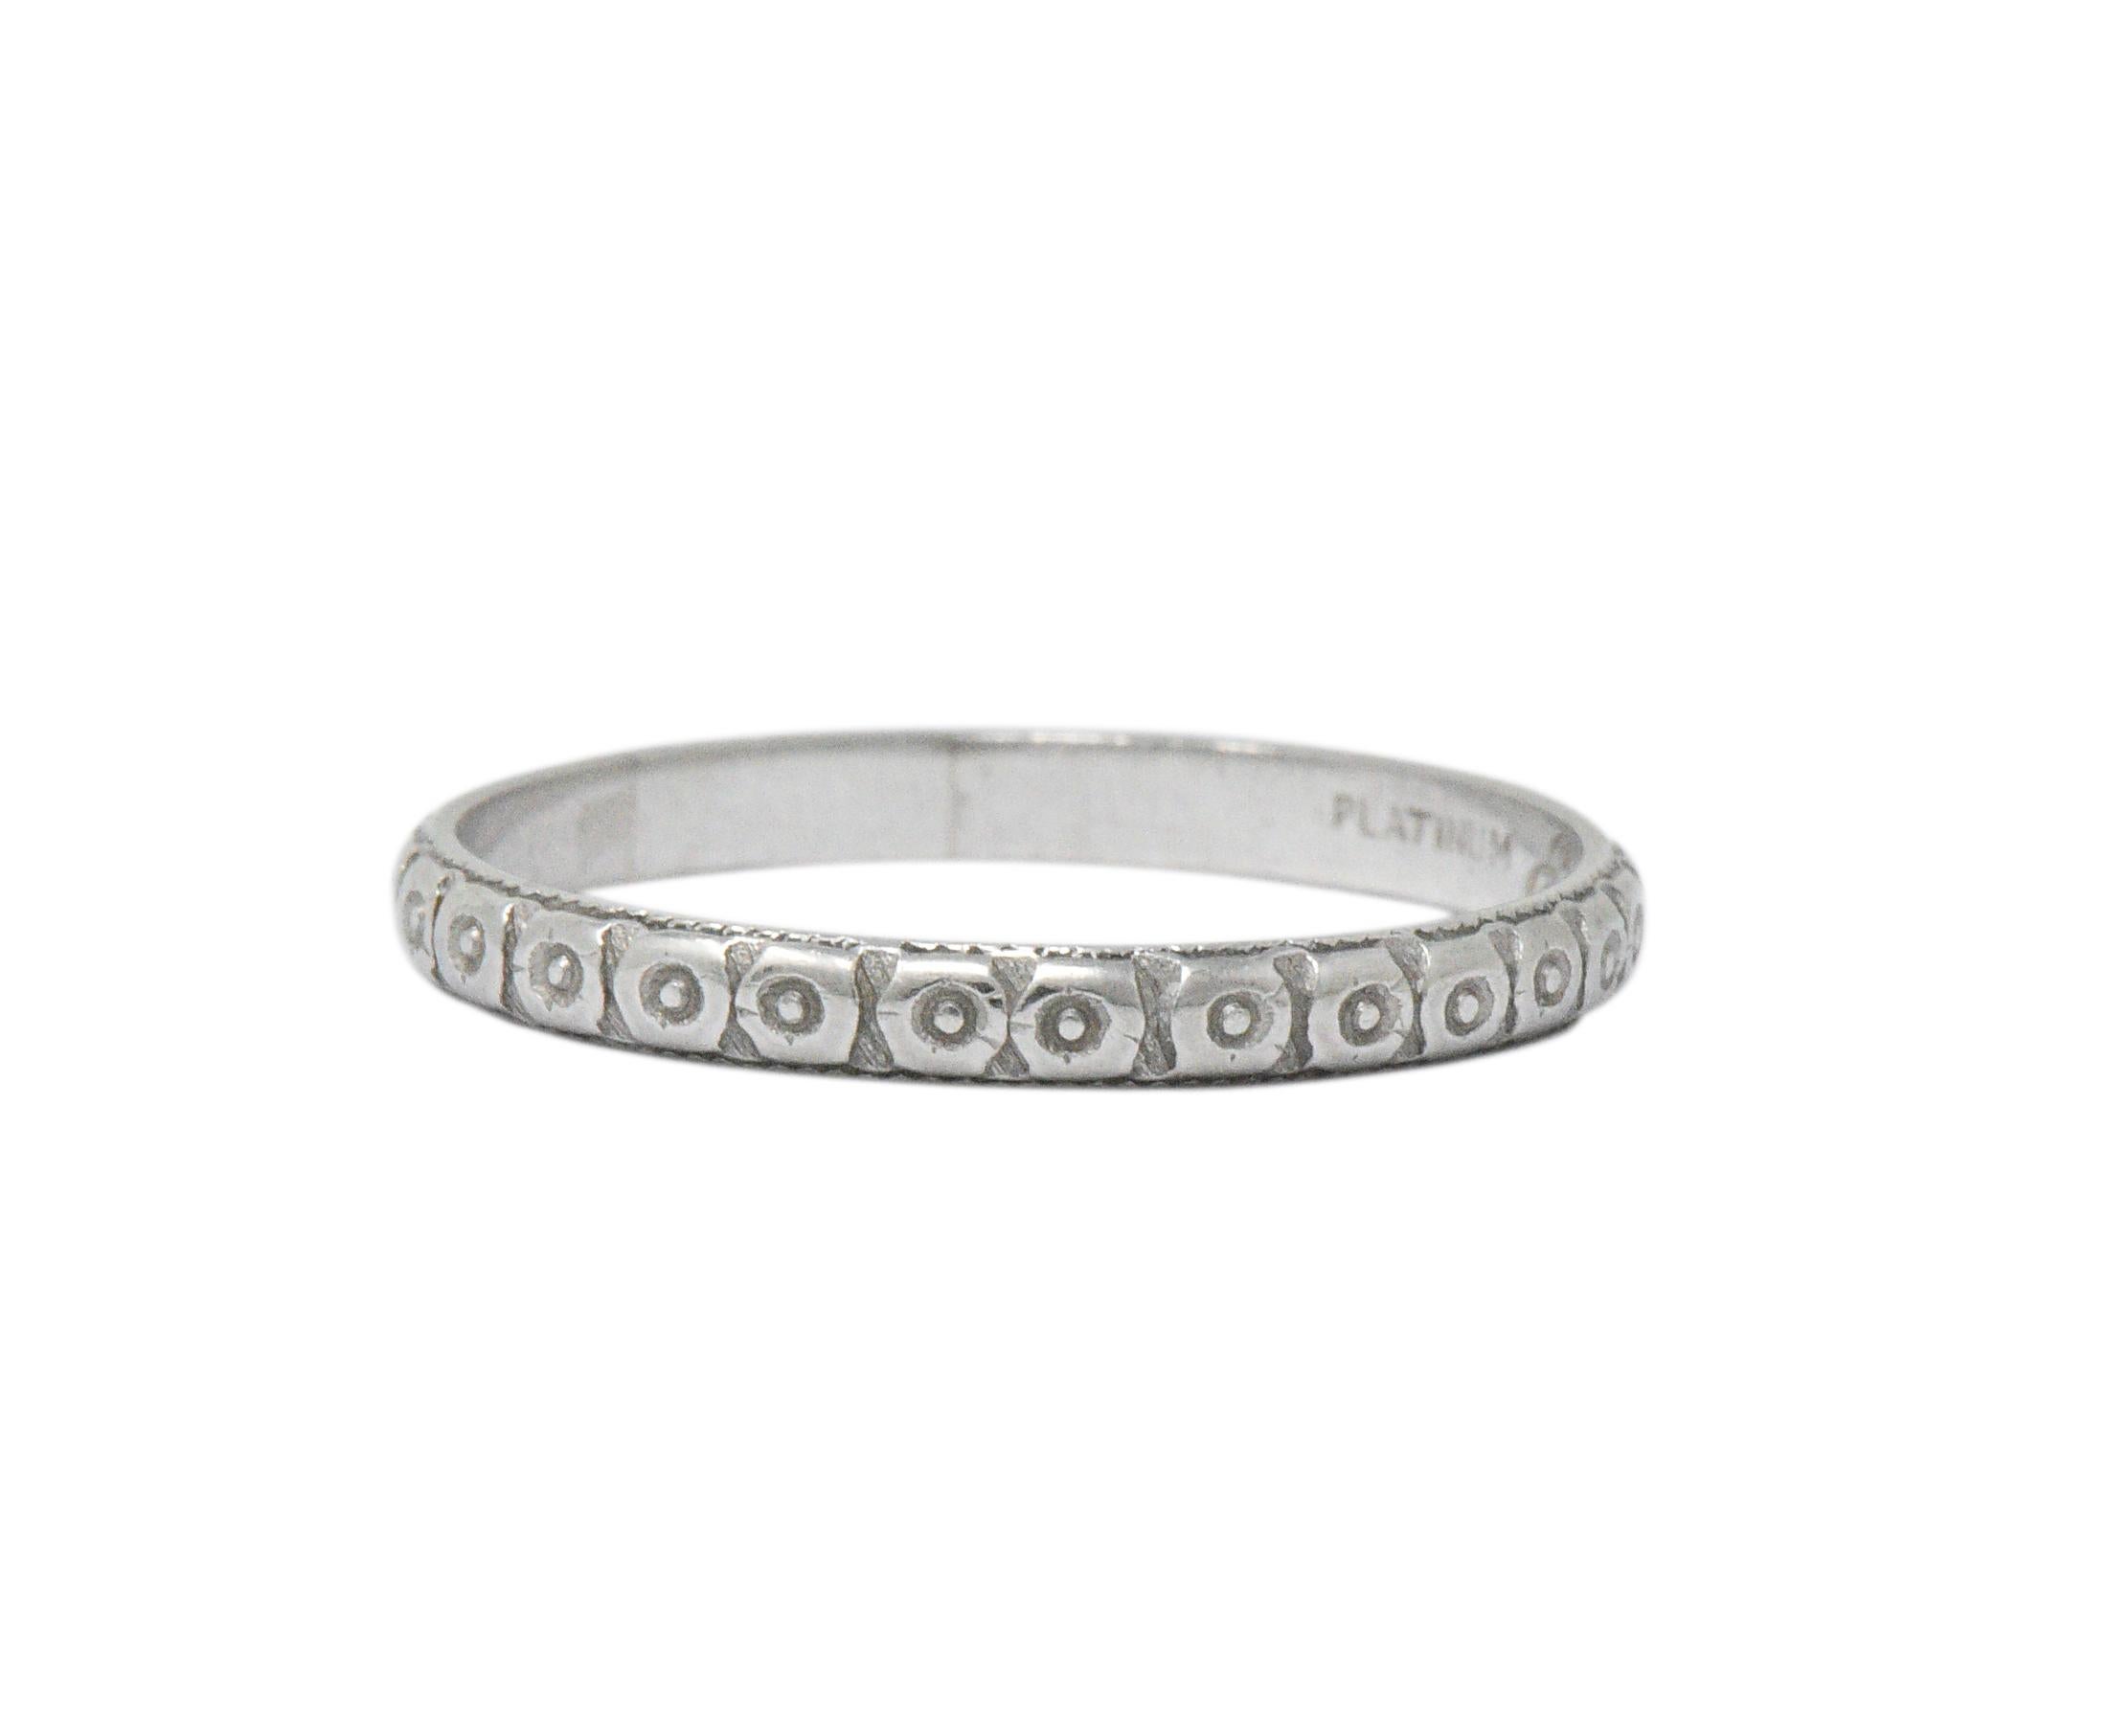 Designed as band of flower blossoms, worn

Engraved on the inside with 